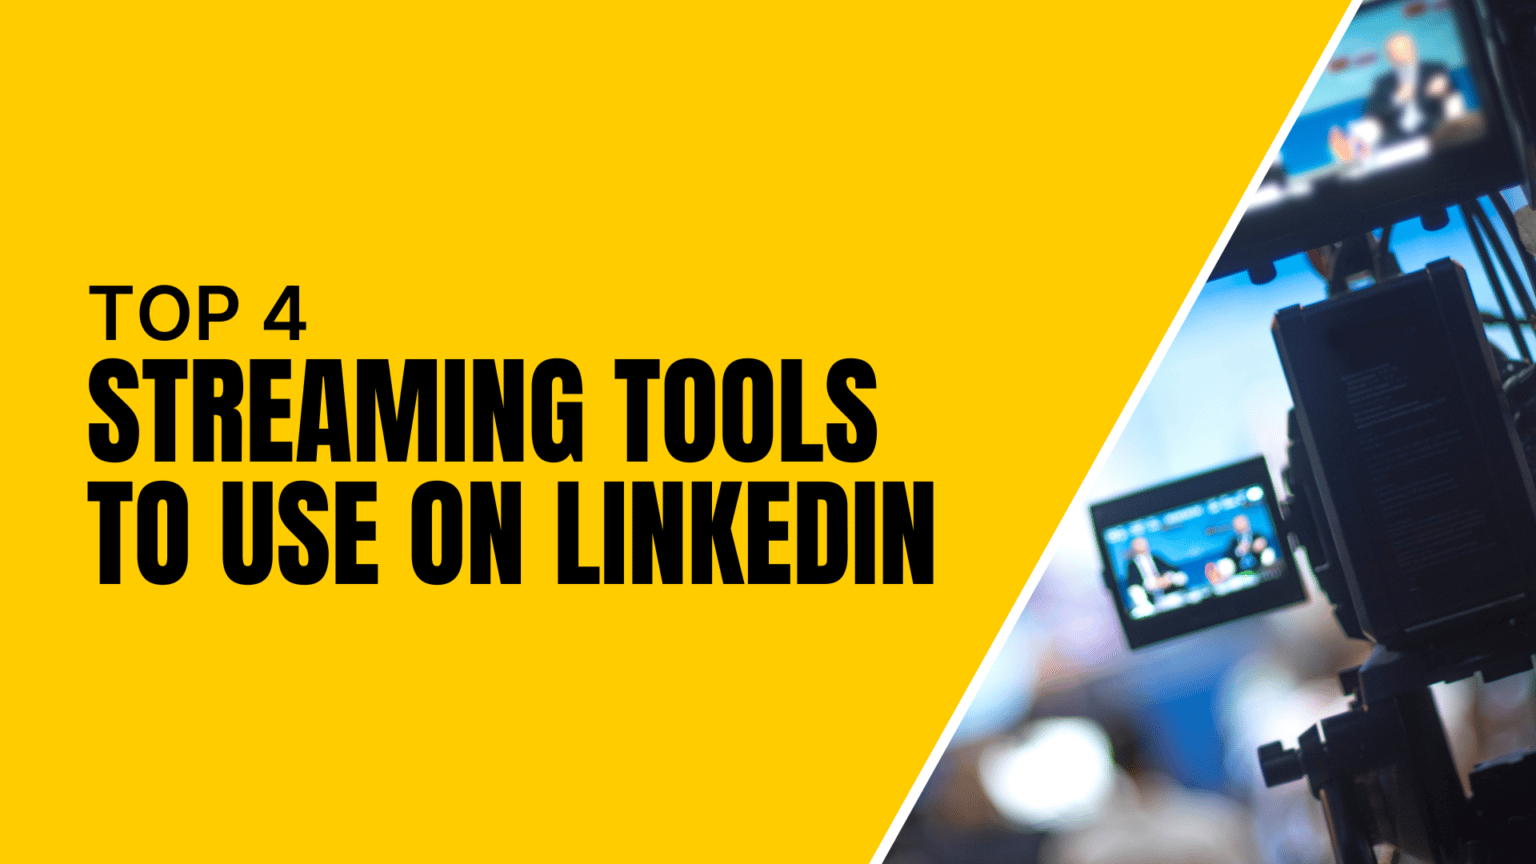 Top 4 Streaming Tools To Use On LinkedIn Featured Image